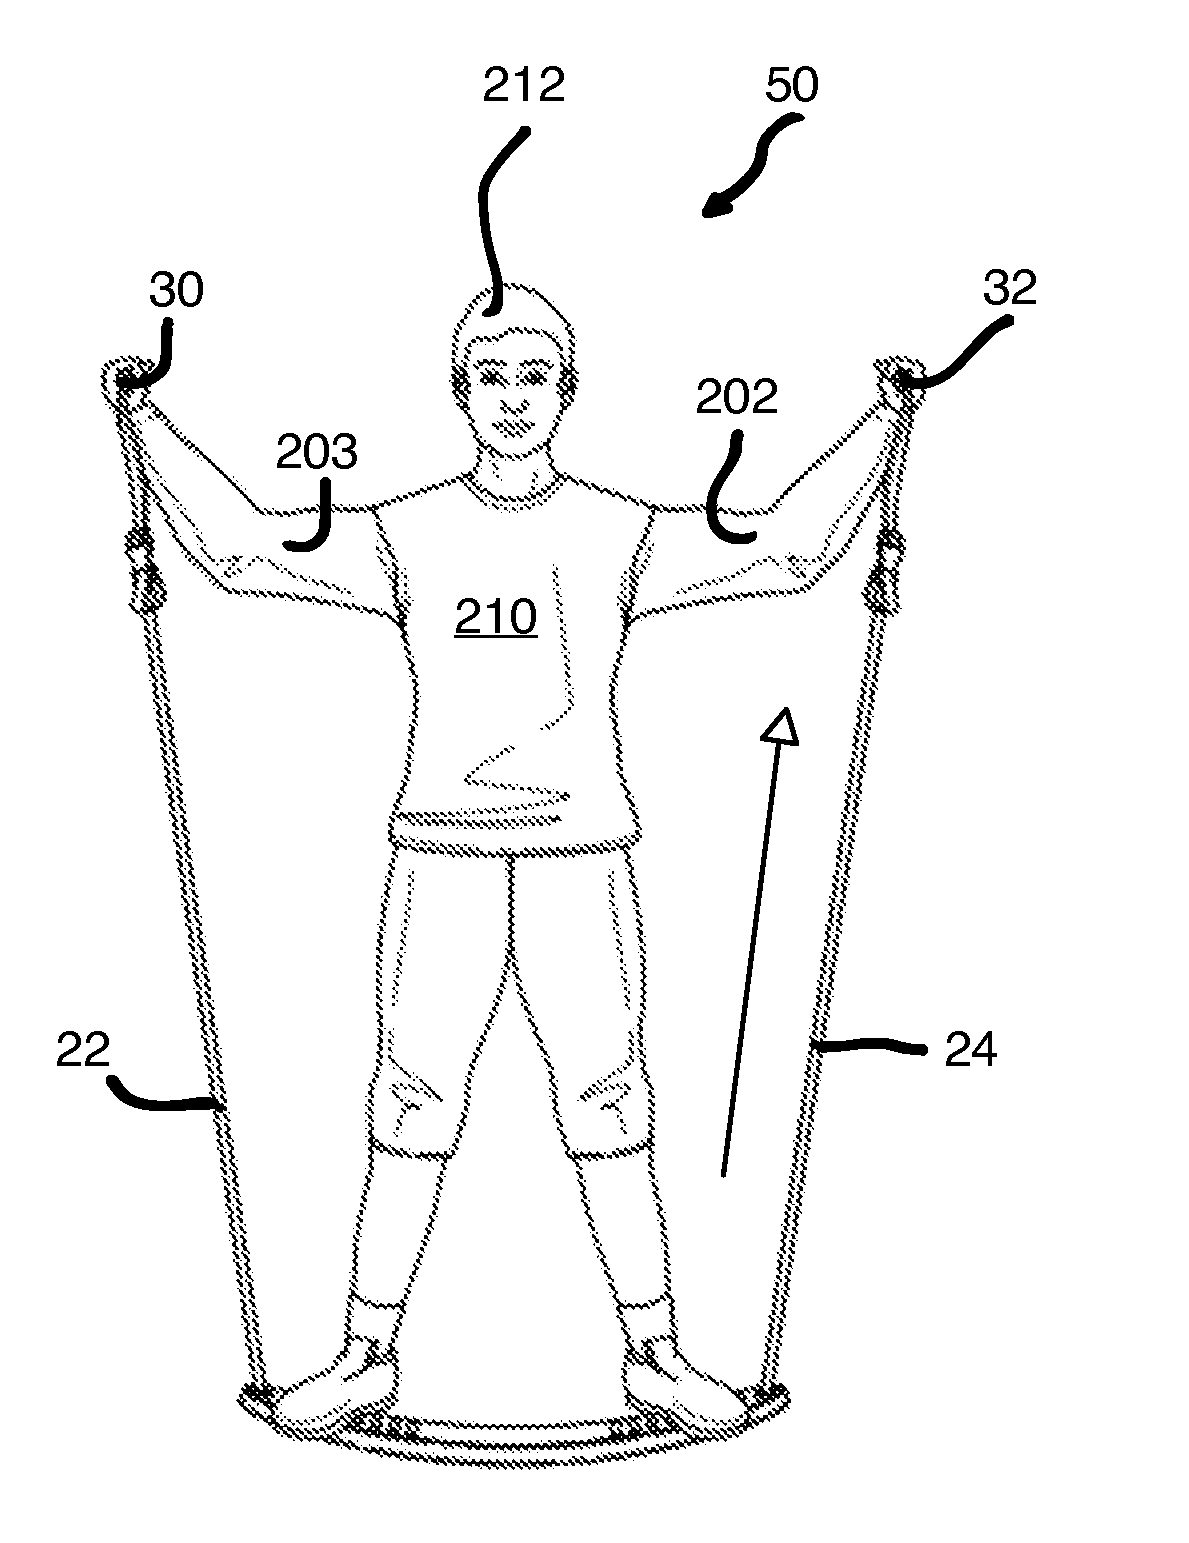 Method and Apparatus for Fitness Exercise